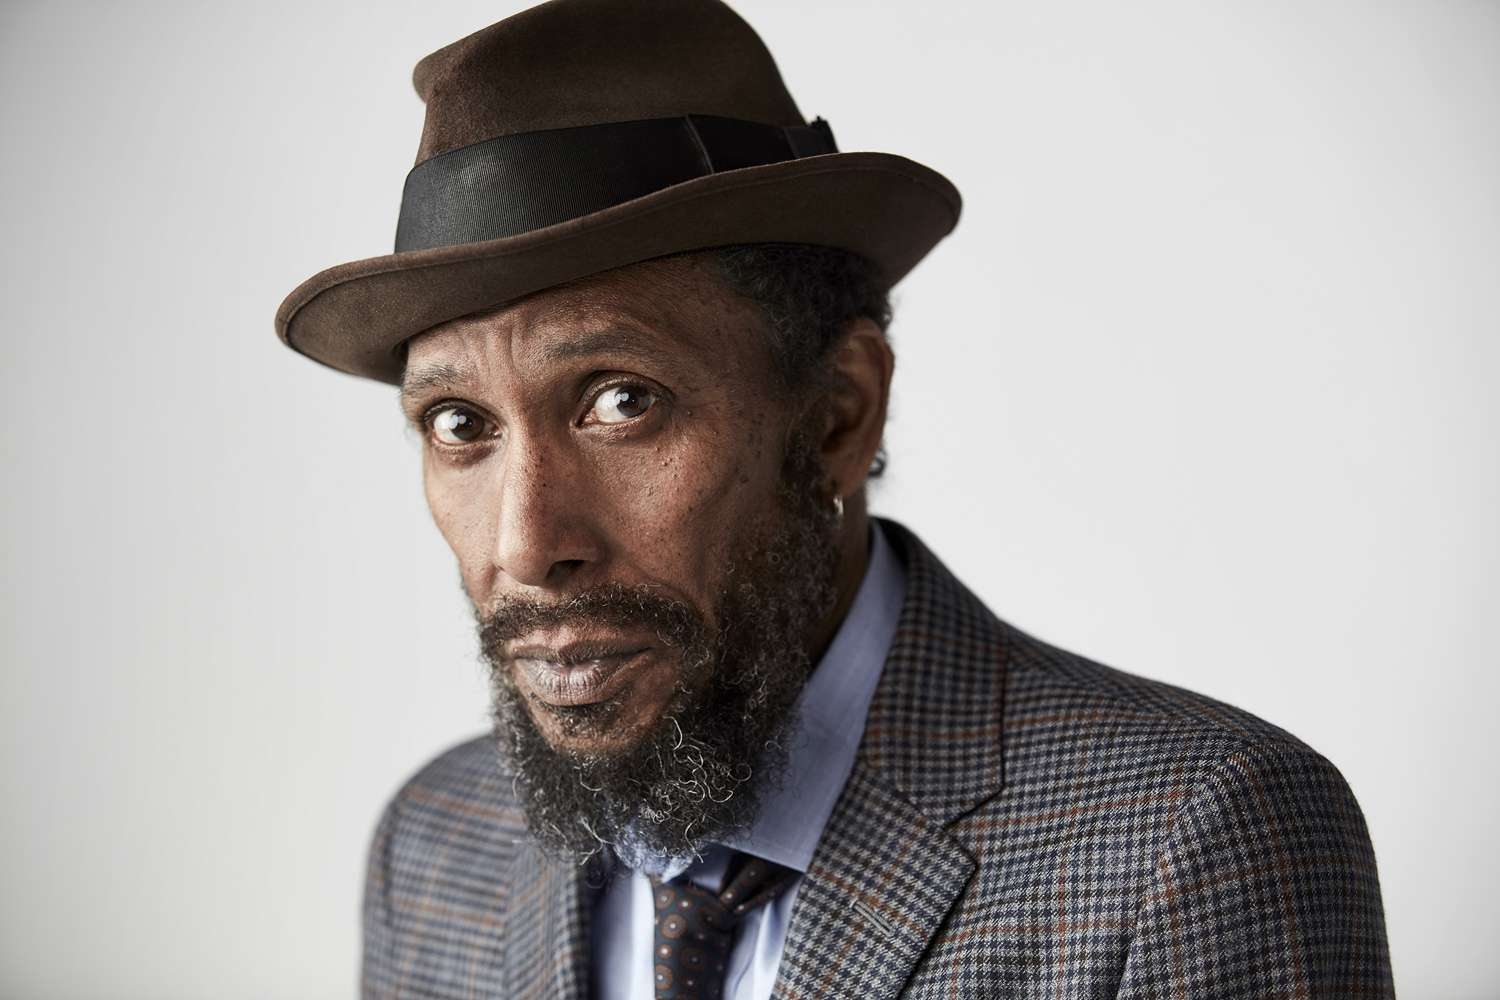 One of the best parts in Luke Cage": Mr. Robot Star Ron Cephas Jones Passing Brings Internet Together in Show of Support - Animated Times